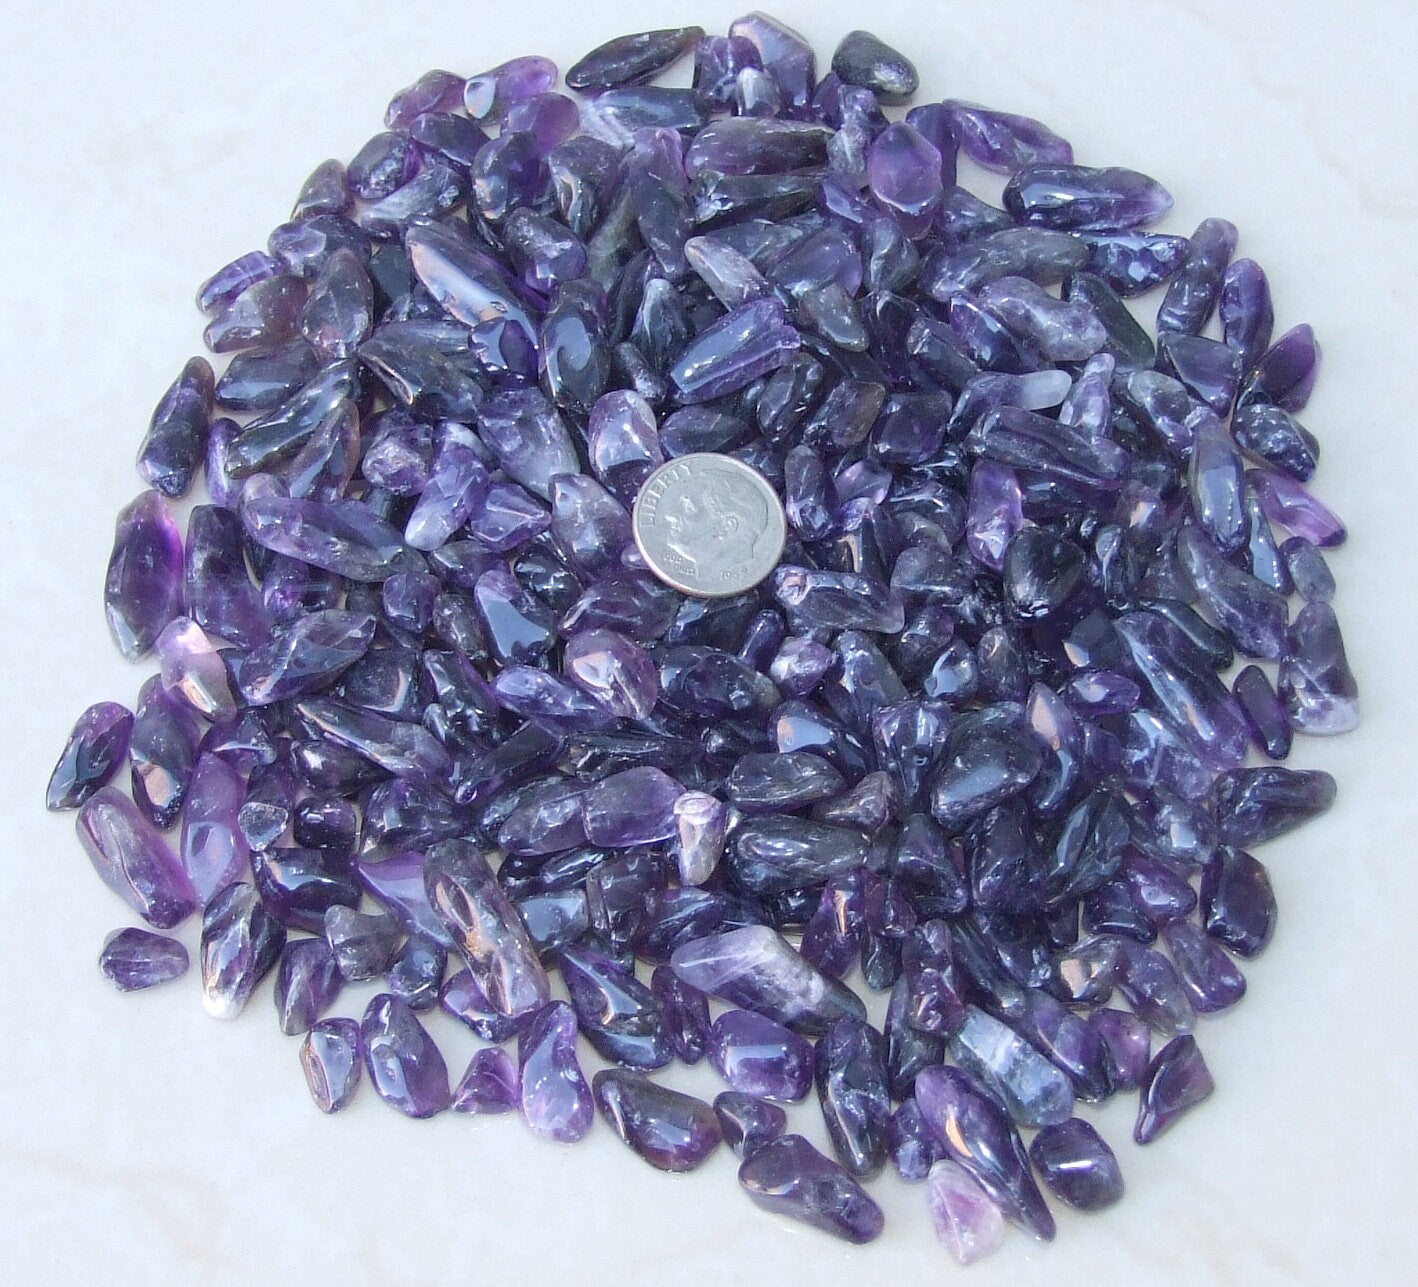 Small Amethyst Polished Stones, Gemstones, Natural Amethyst, Undrilled Gemstone Beads, Loose Bulk Jewelry Stones Nuggets, 1.5 oz 7mm to 23mm